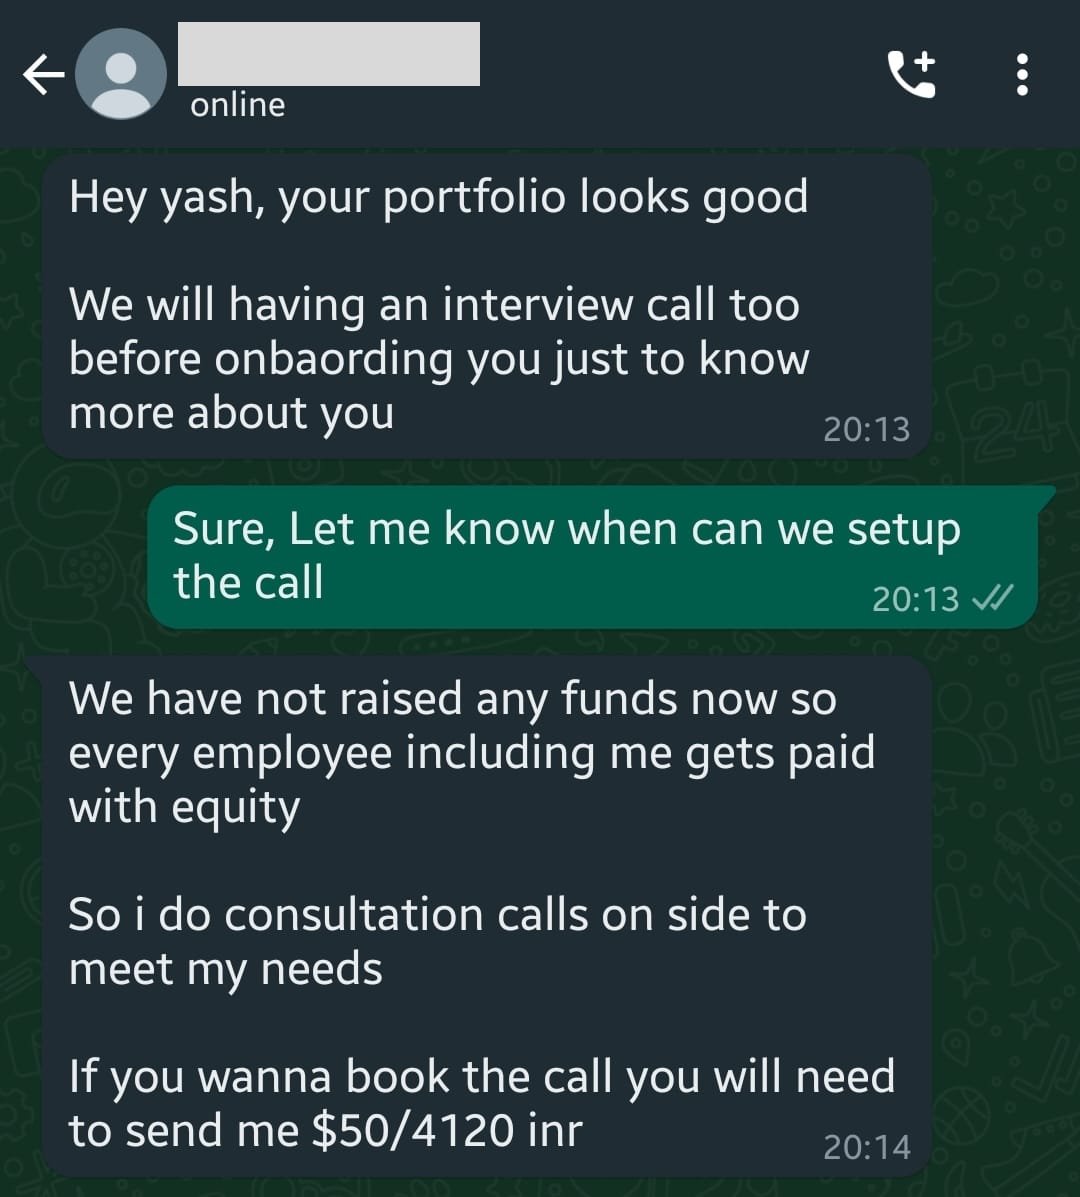 I applied for a role at an early-stage startup

 The POC says he needs the money so that I can book an interview call with him

What's wrong?